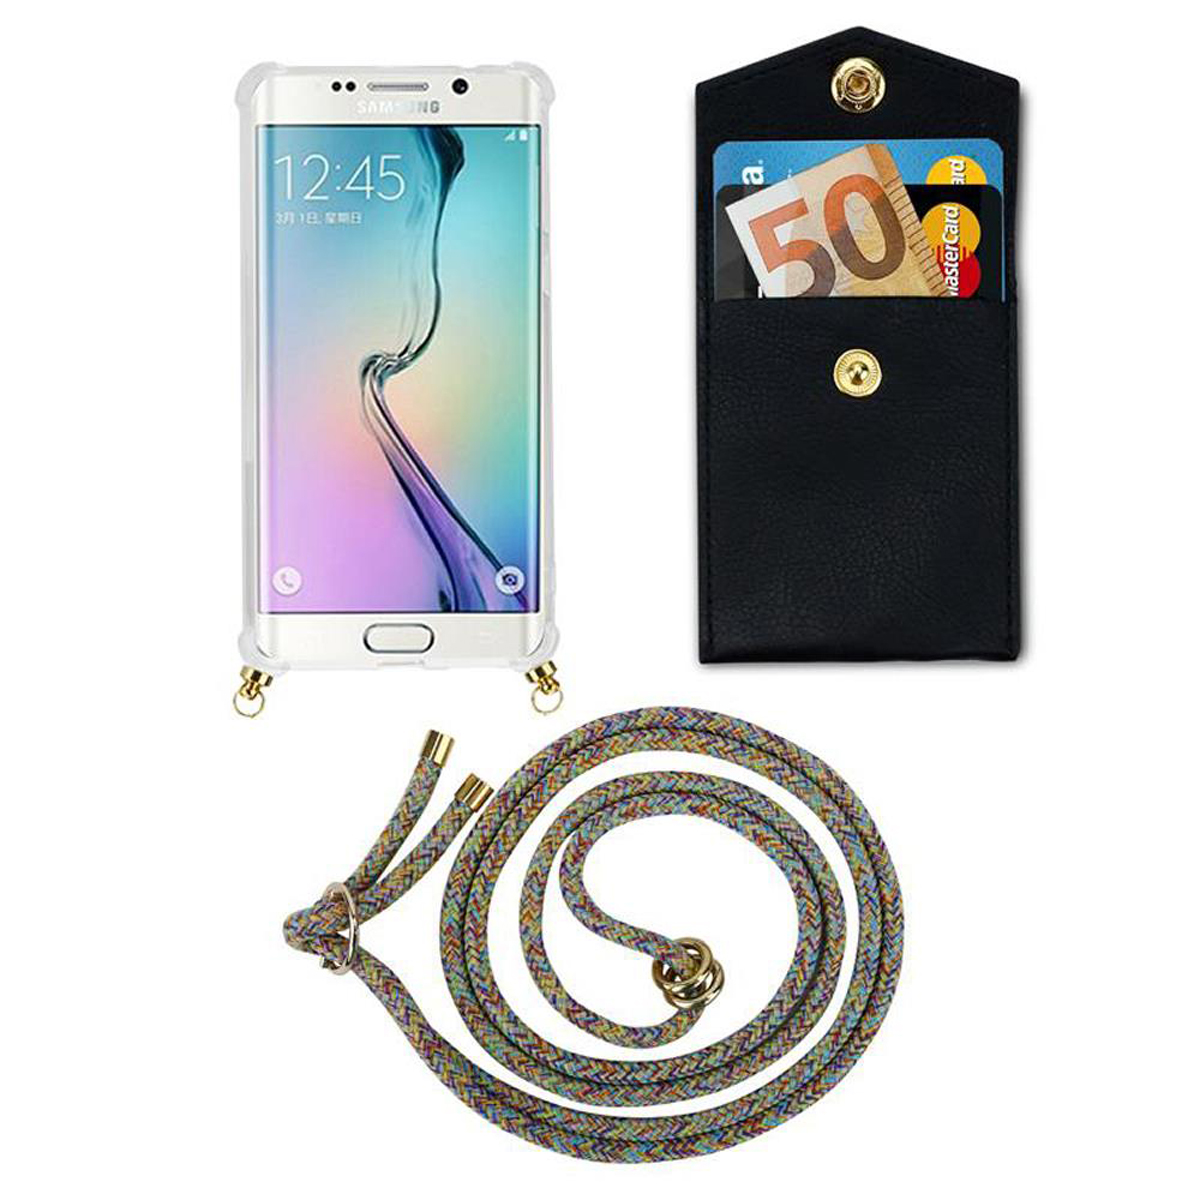 Handy Hülle, RAINBOW mit Galaxy Kordel Gold Ringen, CADORABO abnehmbarer Backcover, Samsung, und Band Kette S6,